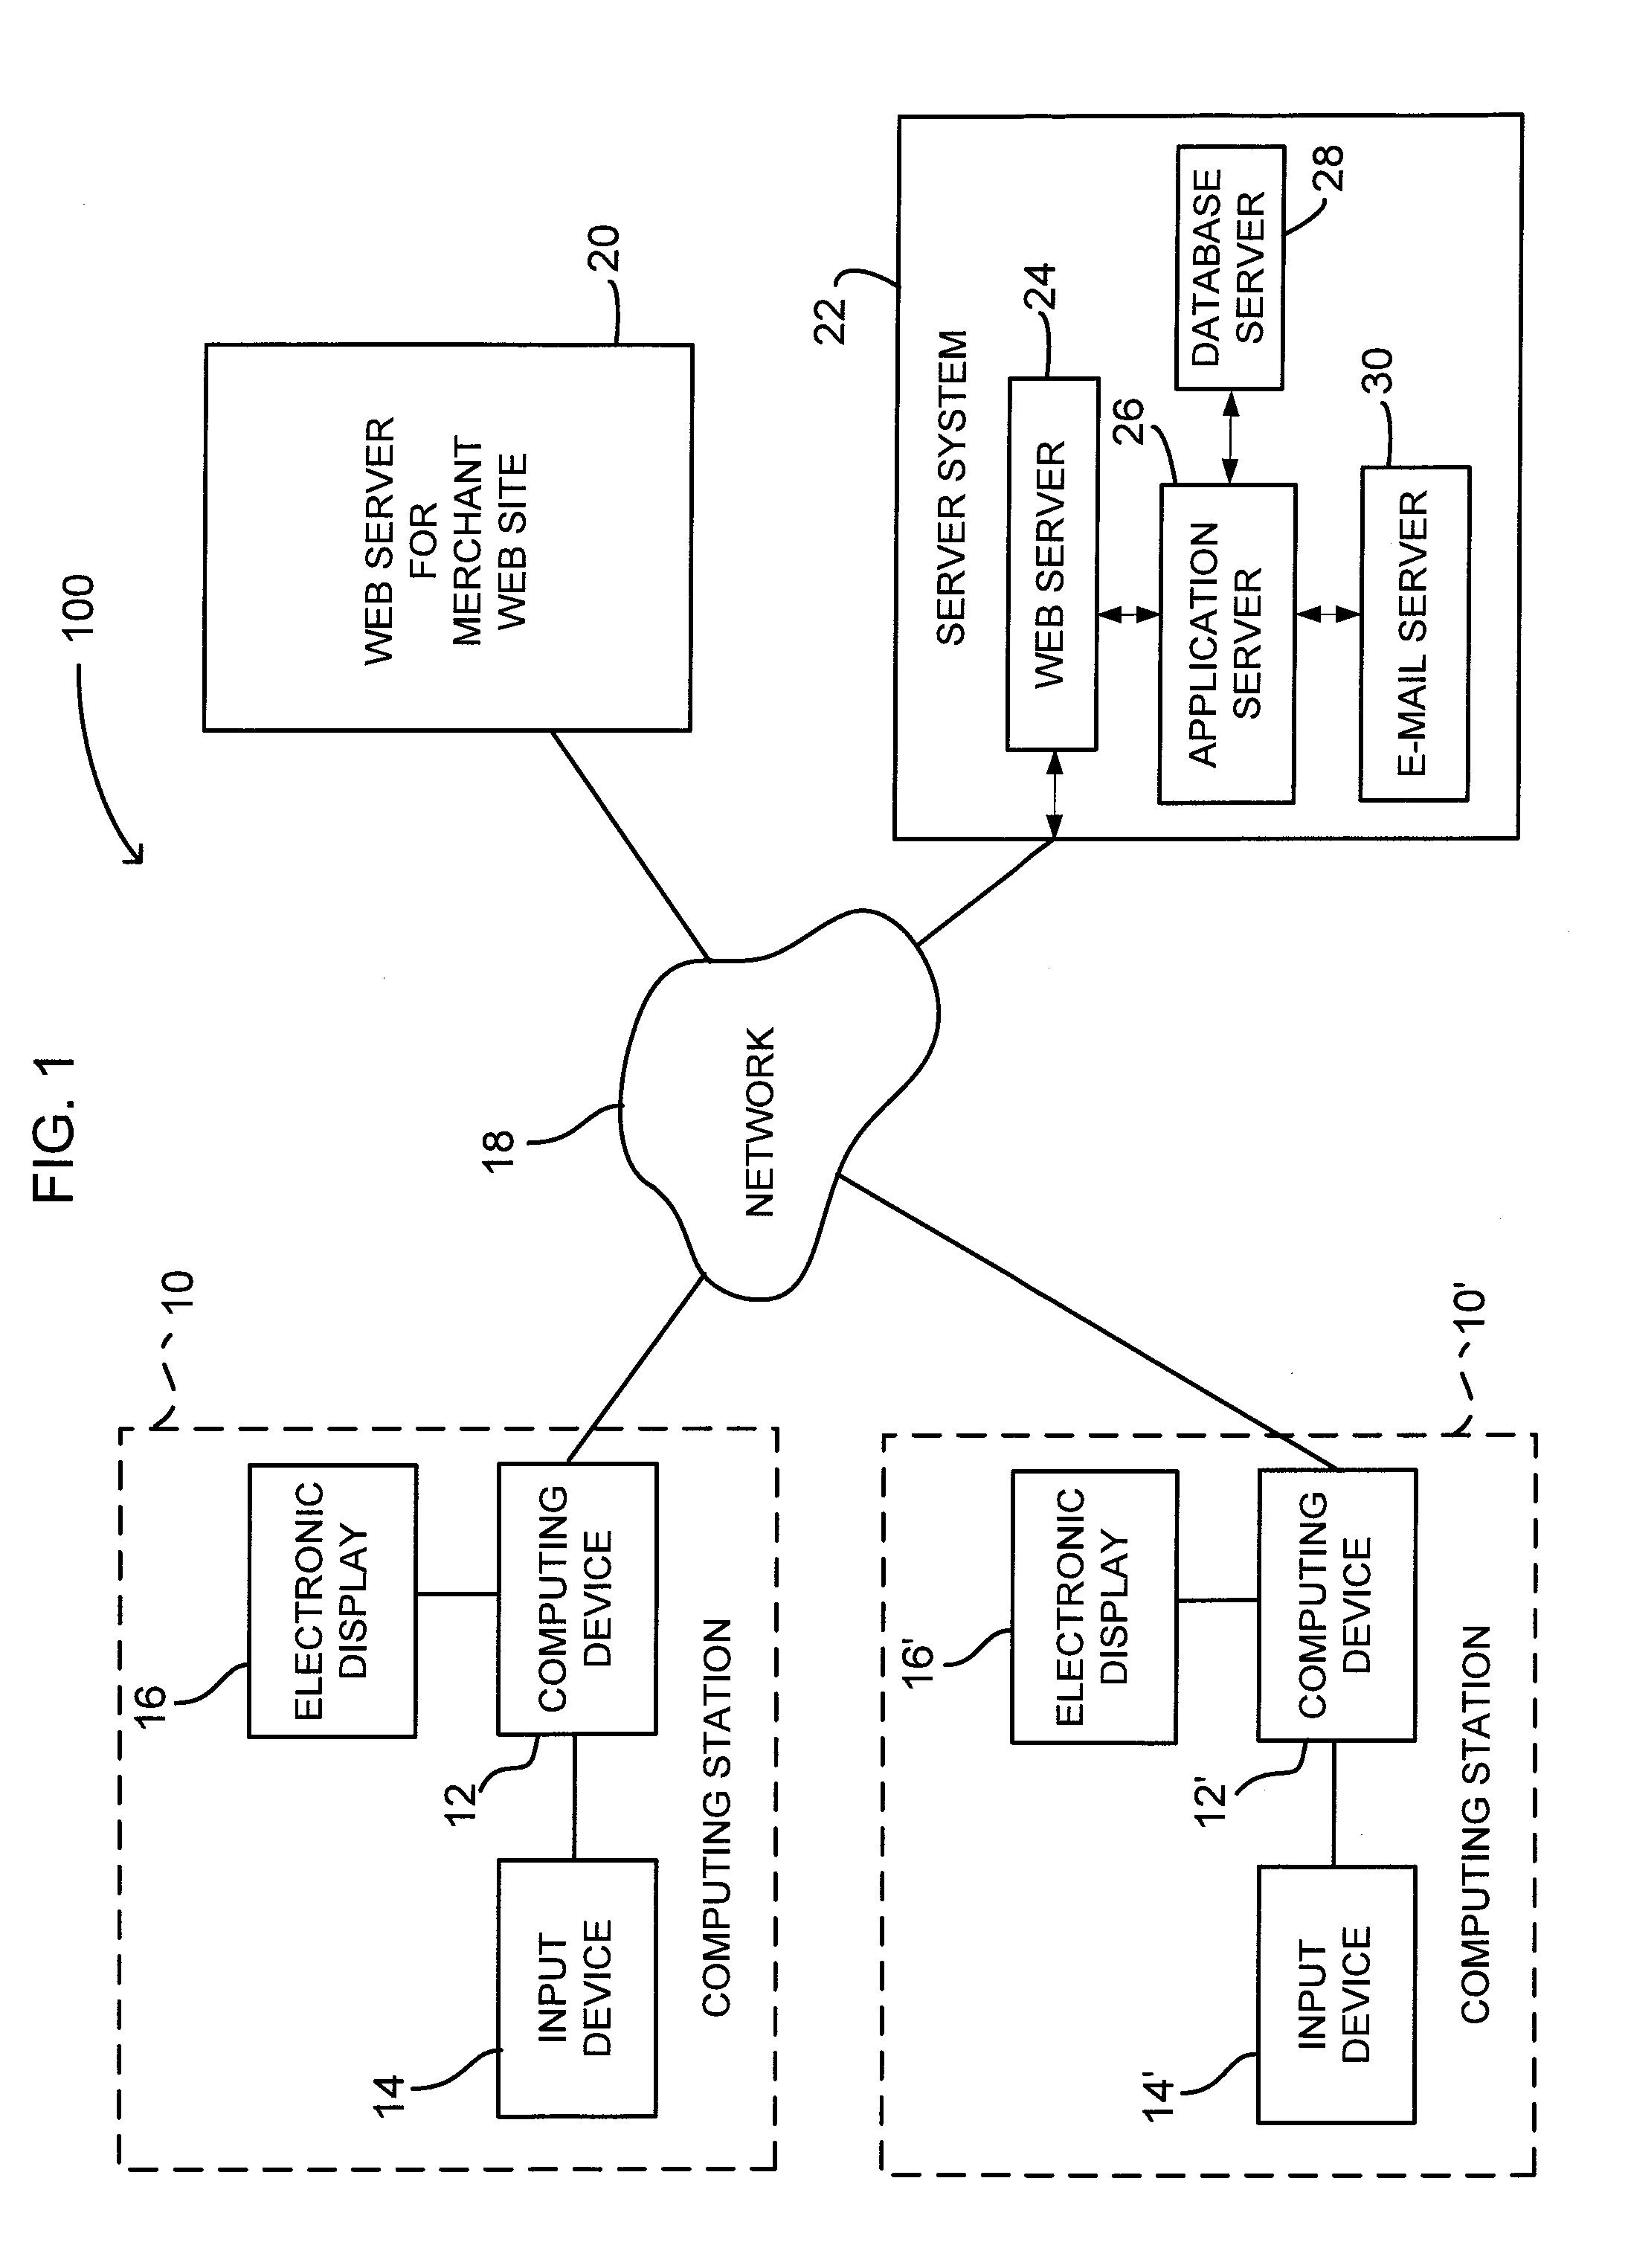 Method of Facilitating a Sale of a Product and/or a Service